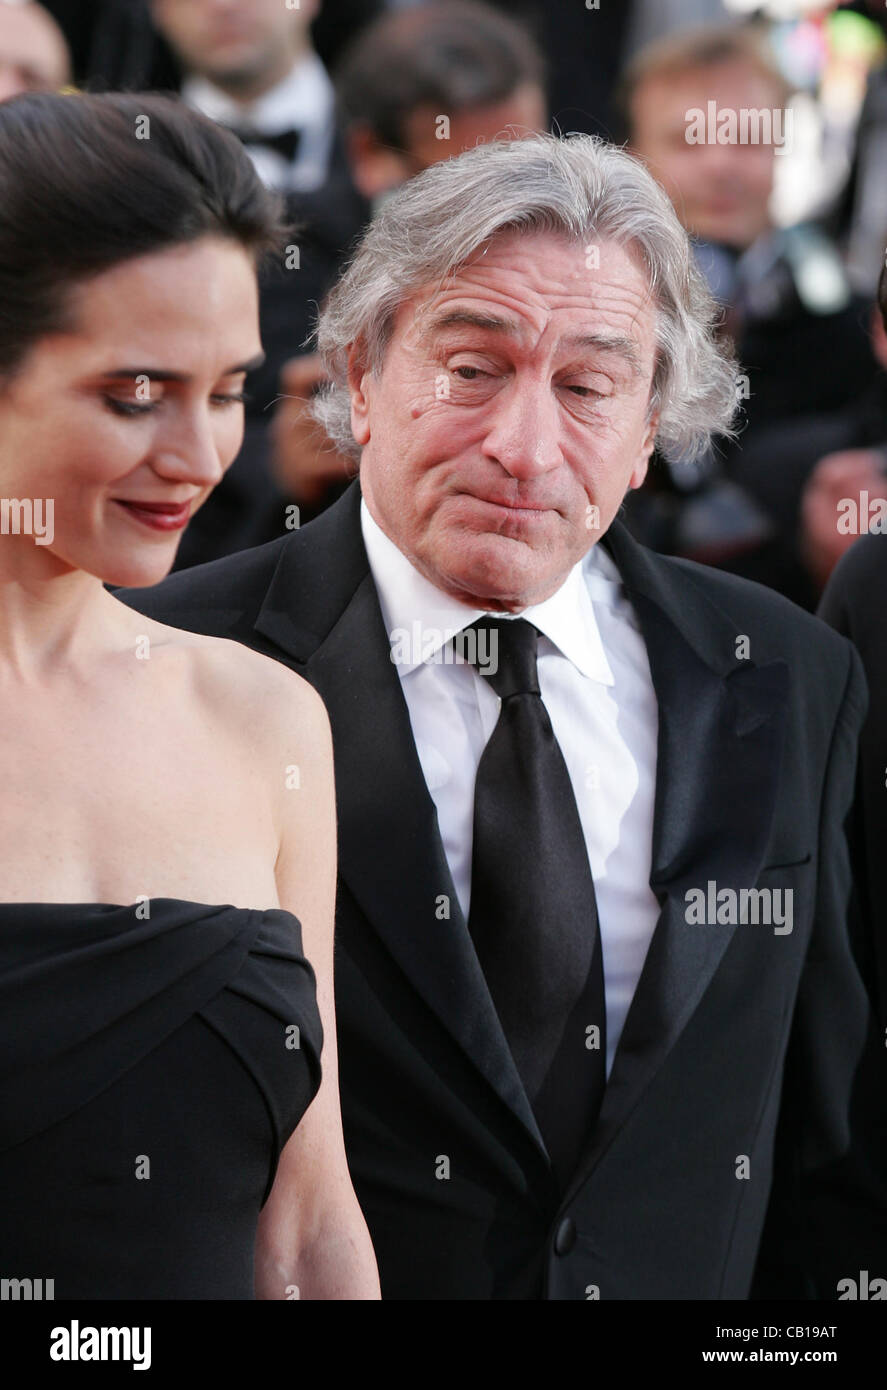 Cannes, France,18/05/2012: Jennifer Connely & Robert De Niro attends Madagascar 3: Europe's most wanted - 65th Annual Cannes Film Festival at Palais des Festivals Stock Photo